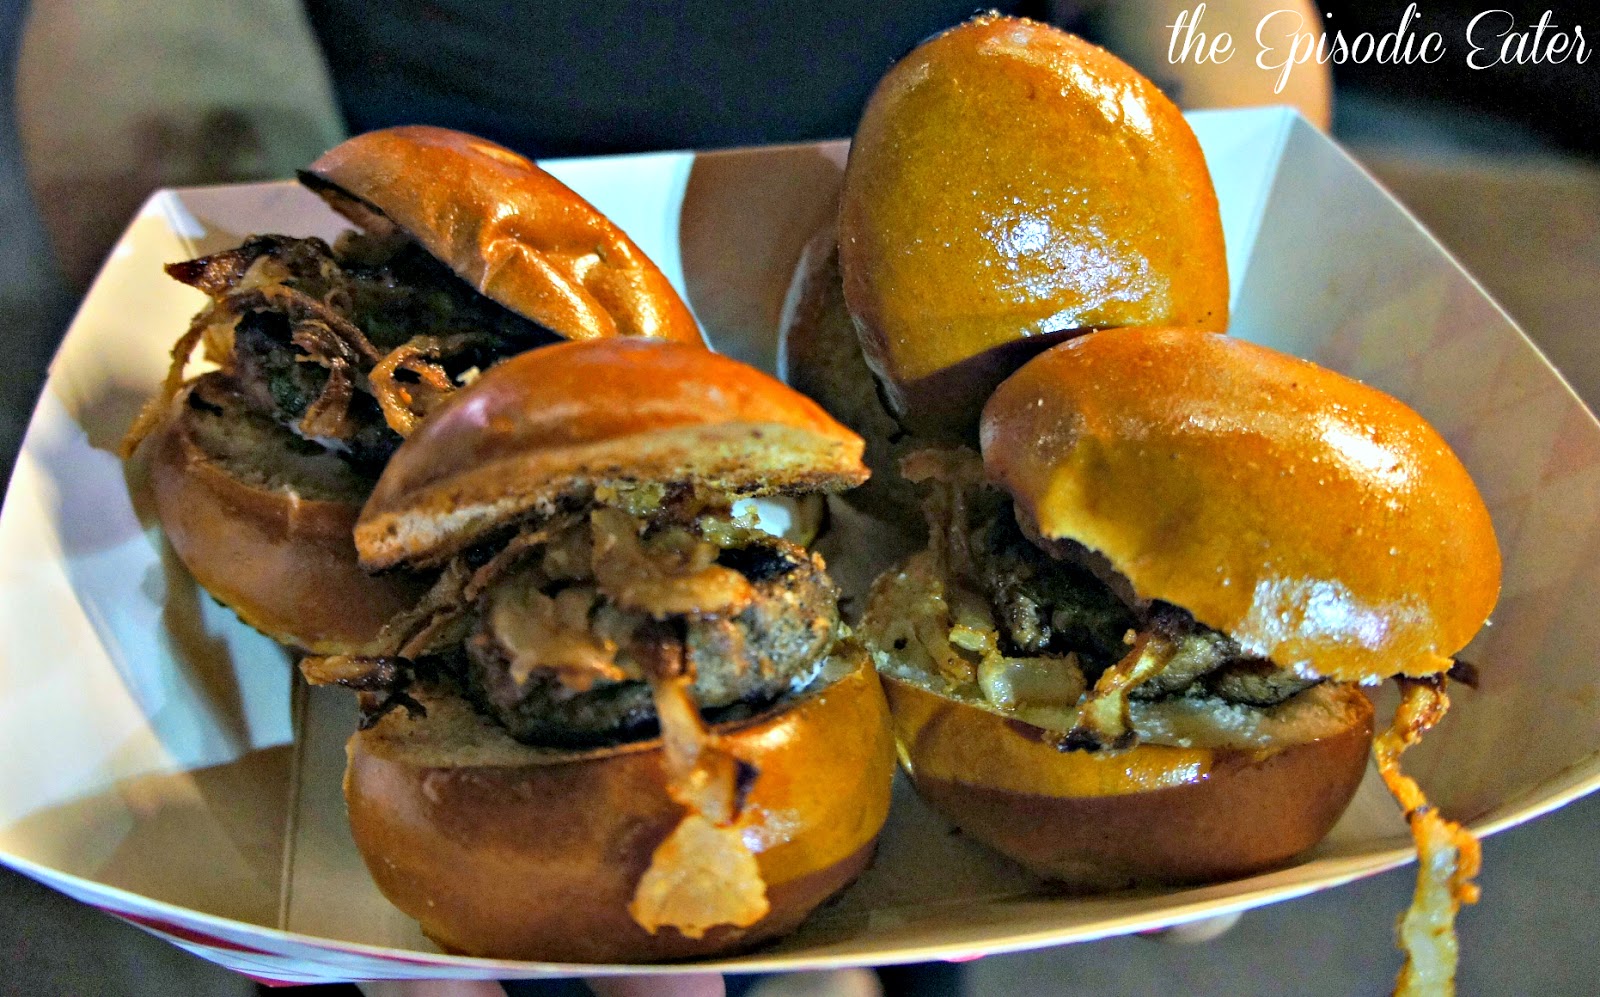 L.A. Street Food Fest (Pasadena, CA) on The Episodic Eater